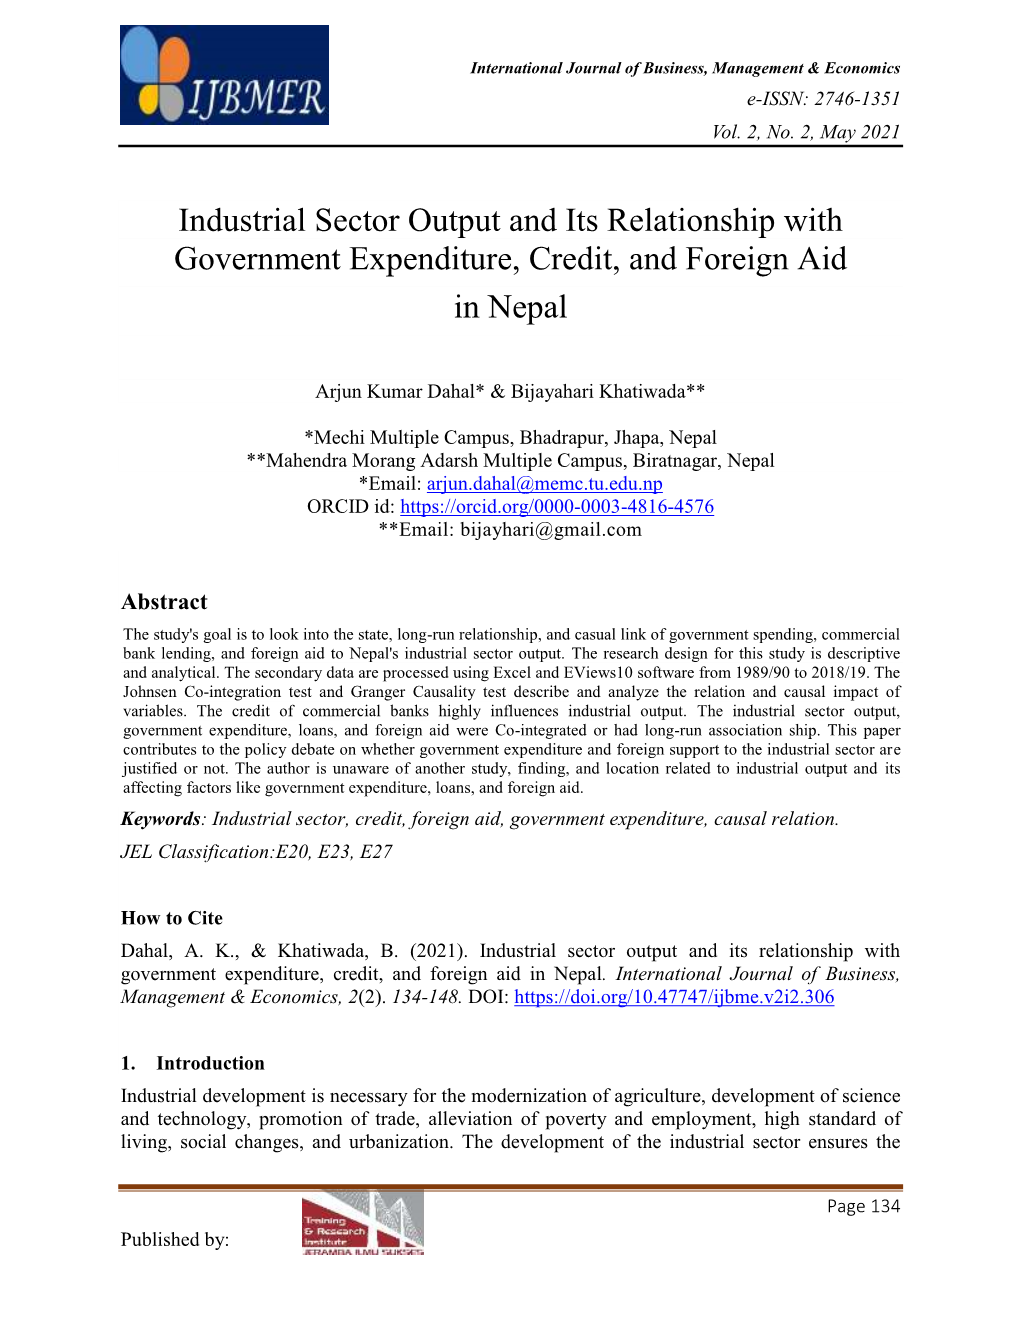 Industrial Sector Output and Its Relationship with Government Expenditure, Credit, and Foreign Aid in Nepal